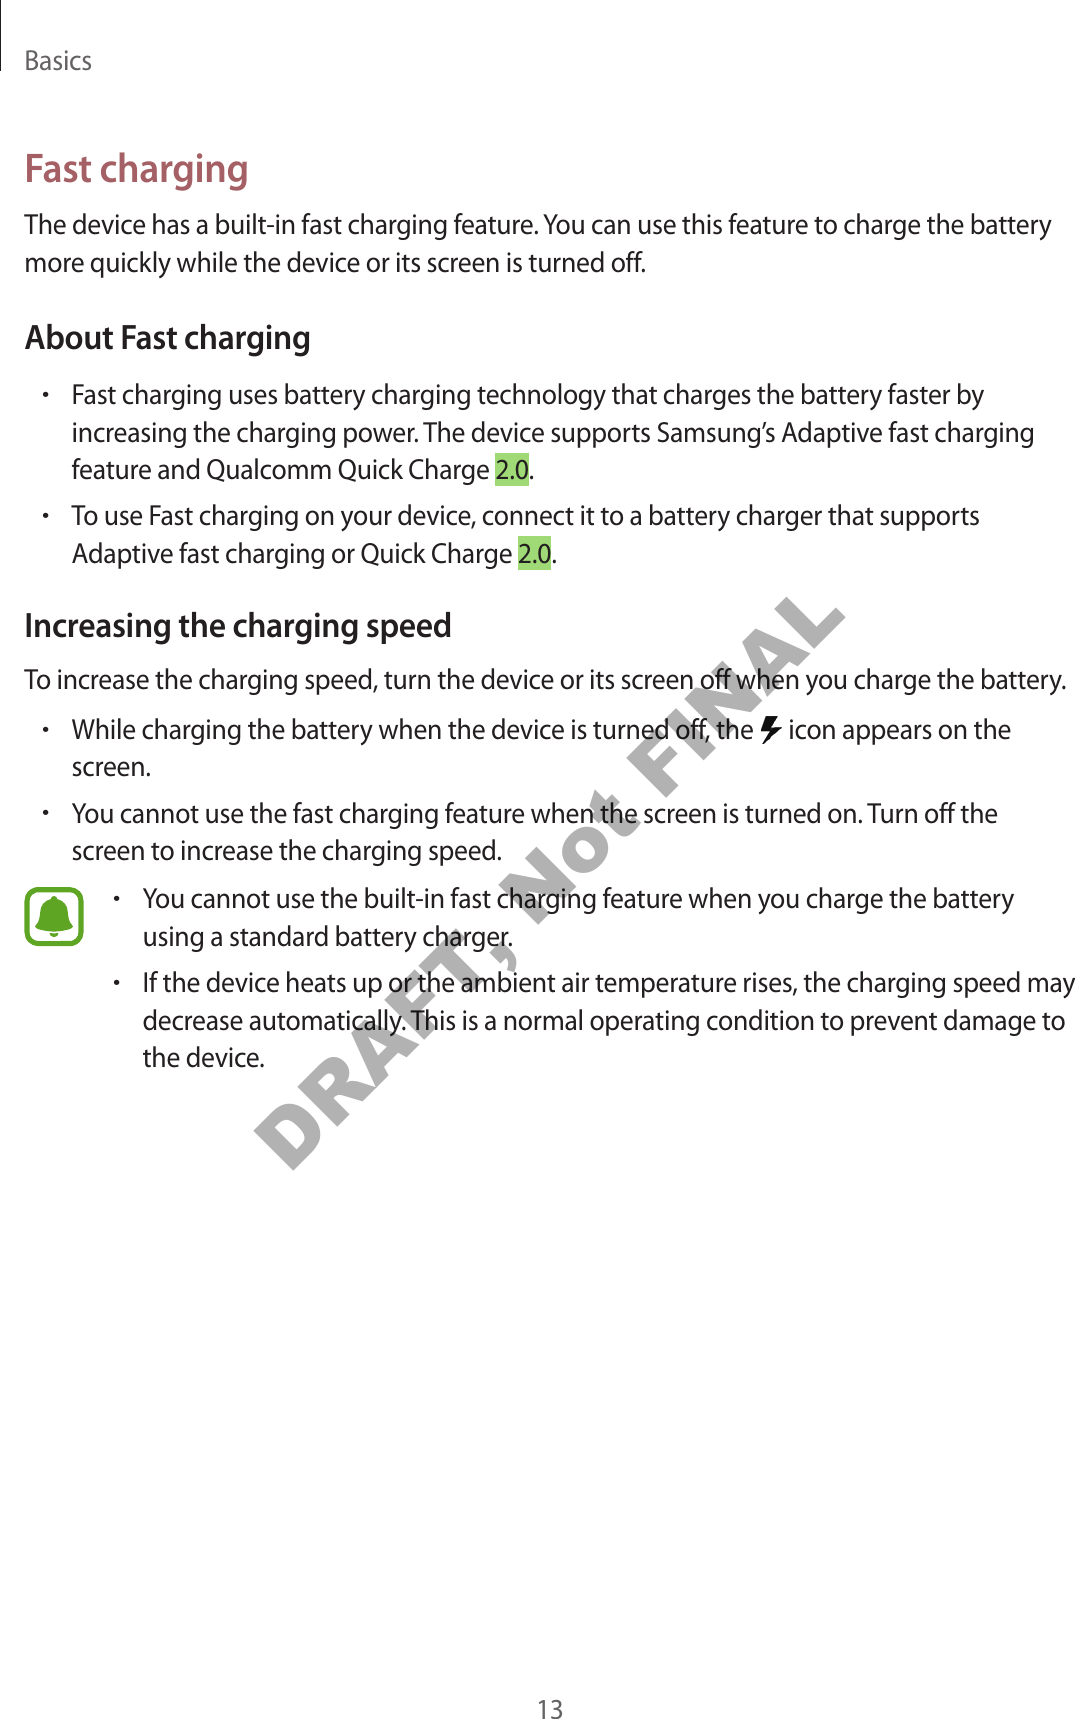 Basics13Fast chargingThe device has a built -in fast charg ing f ea tur e . You can use this featur e to char ge the batt ery more quickly while the device or its screen is turned off.About Fast charging•Fast charg ing uses batt ery charging technology that charges the ba ttery faster by increasing the char ging po w er. The device supports Samsung ’s Adaptiv e fast char ging featur e and Qualc omm Quick Charge 2.0.•To use Fast charg ing on y our device, connect it to a batt ery charger that supports Adaptiv e fast char ging or Quick Char ge 2.0.Increasing the charg ing speedTo increase the char ging speed , turn the device or its scr een off when y ou char ge the ba ttery.•While charg ing the batt ery when the device is turned off , the   icon appears on the screen.•You cannot use the fast charging featur e when the screen is turned on.  Turn off the screen to incr ease the char g ing speed .•You cannot use the built-in fast charging f eatur e when y ou char ge the batt ery using a standard batt ery charger.•If the device heats up or the ambient air tempera tur e rises, the char g ing speed ma y decrease automa tically. T his is a normal operating c ondition to pr ev en t damage to the device .DRAFT, Not FINAL